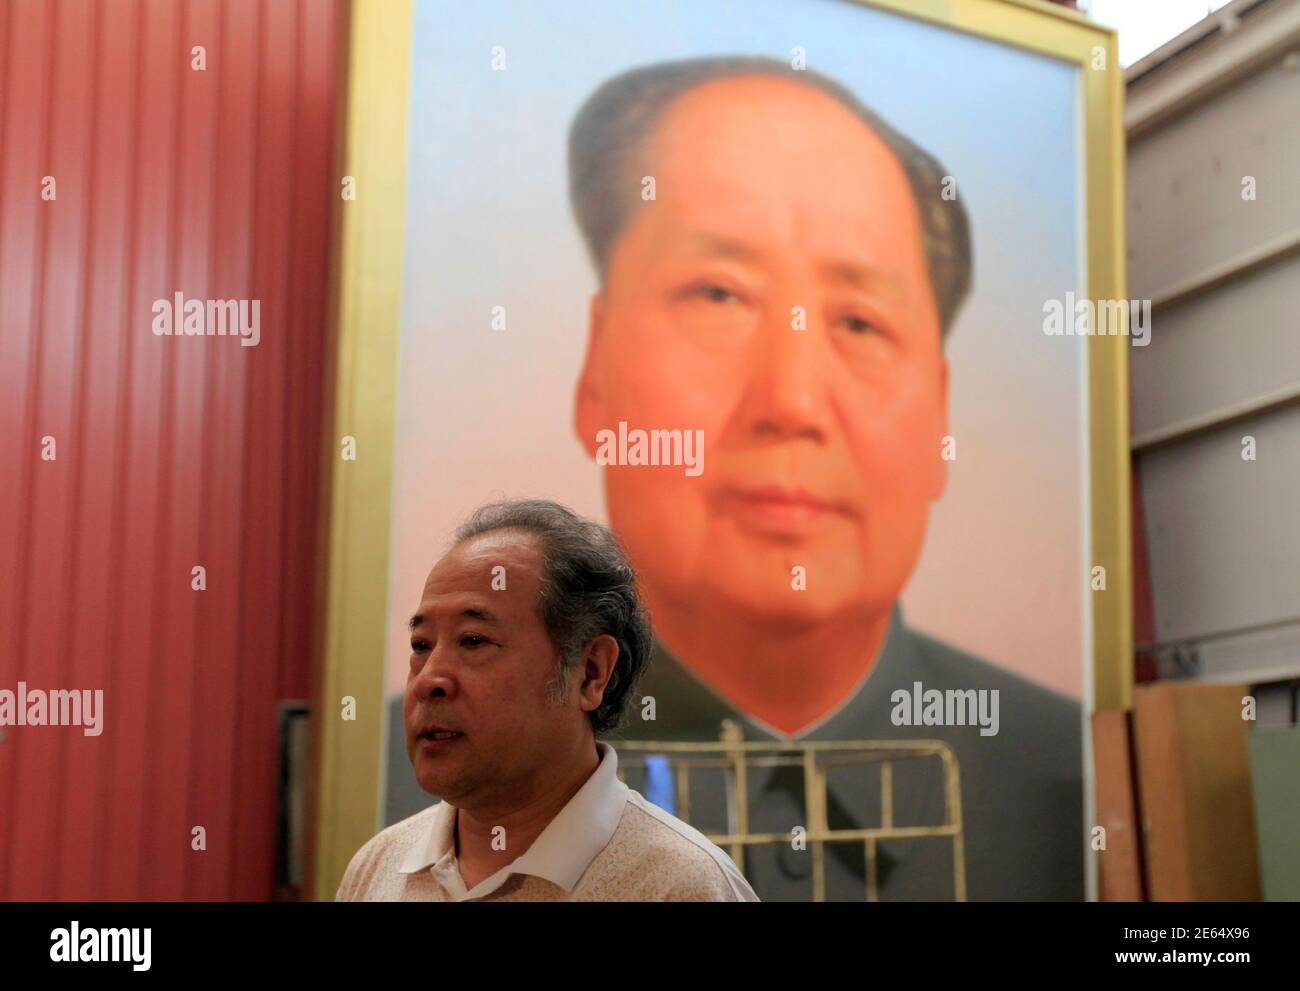 Ge Xiaoguang speaks in front of a giant portrait of China's late Chairman Mao Zedong during a interview with Reuters in his working studio located between the Tiananmen Square and the Forbidden City in Beijing June 29, 2011. Reclusive Chinese painter Ge's art has gazed over one of the world's most famous city squares for decades. For 30 years, he has painted the portraits of former paramount leader Mao Zedong that look across Beijing's Tiananmen Square. The giant oil paintings of the "Great Helmsman" have kept watch from the Gate of Heavenly Peace since the Communist Party won the civil war an Stock Photo